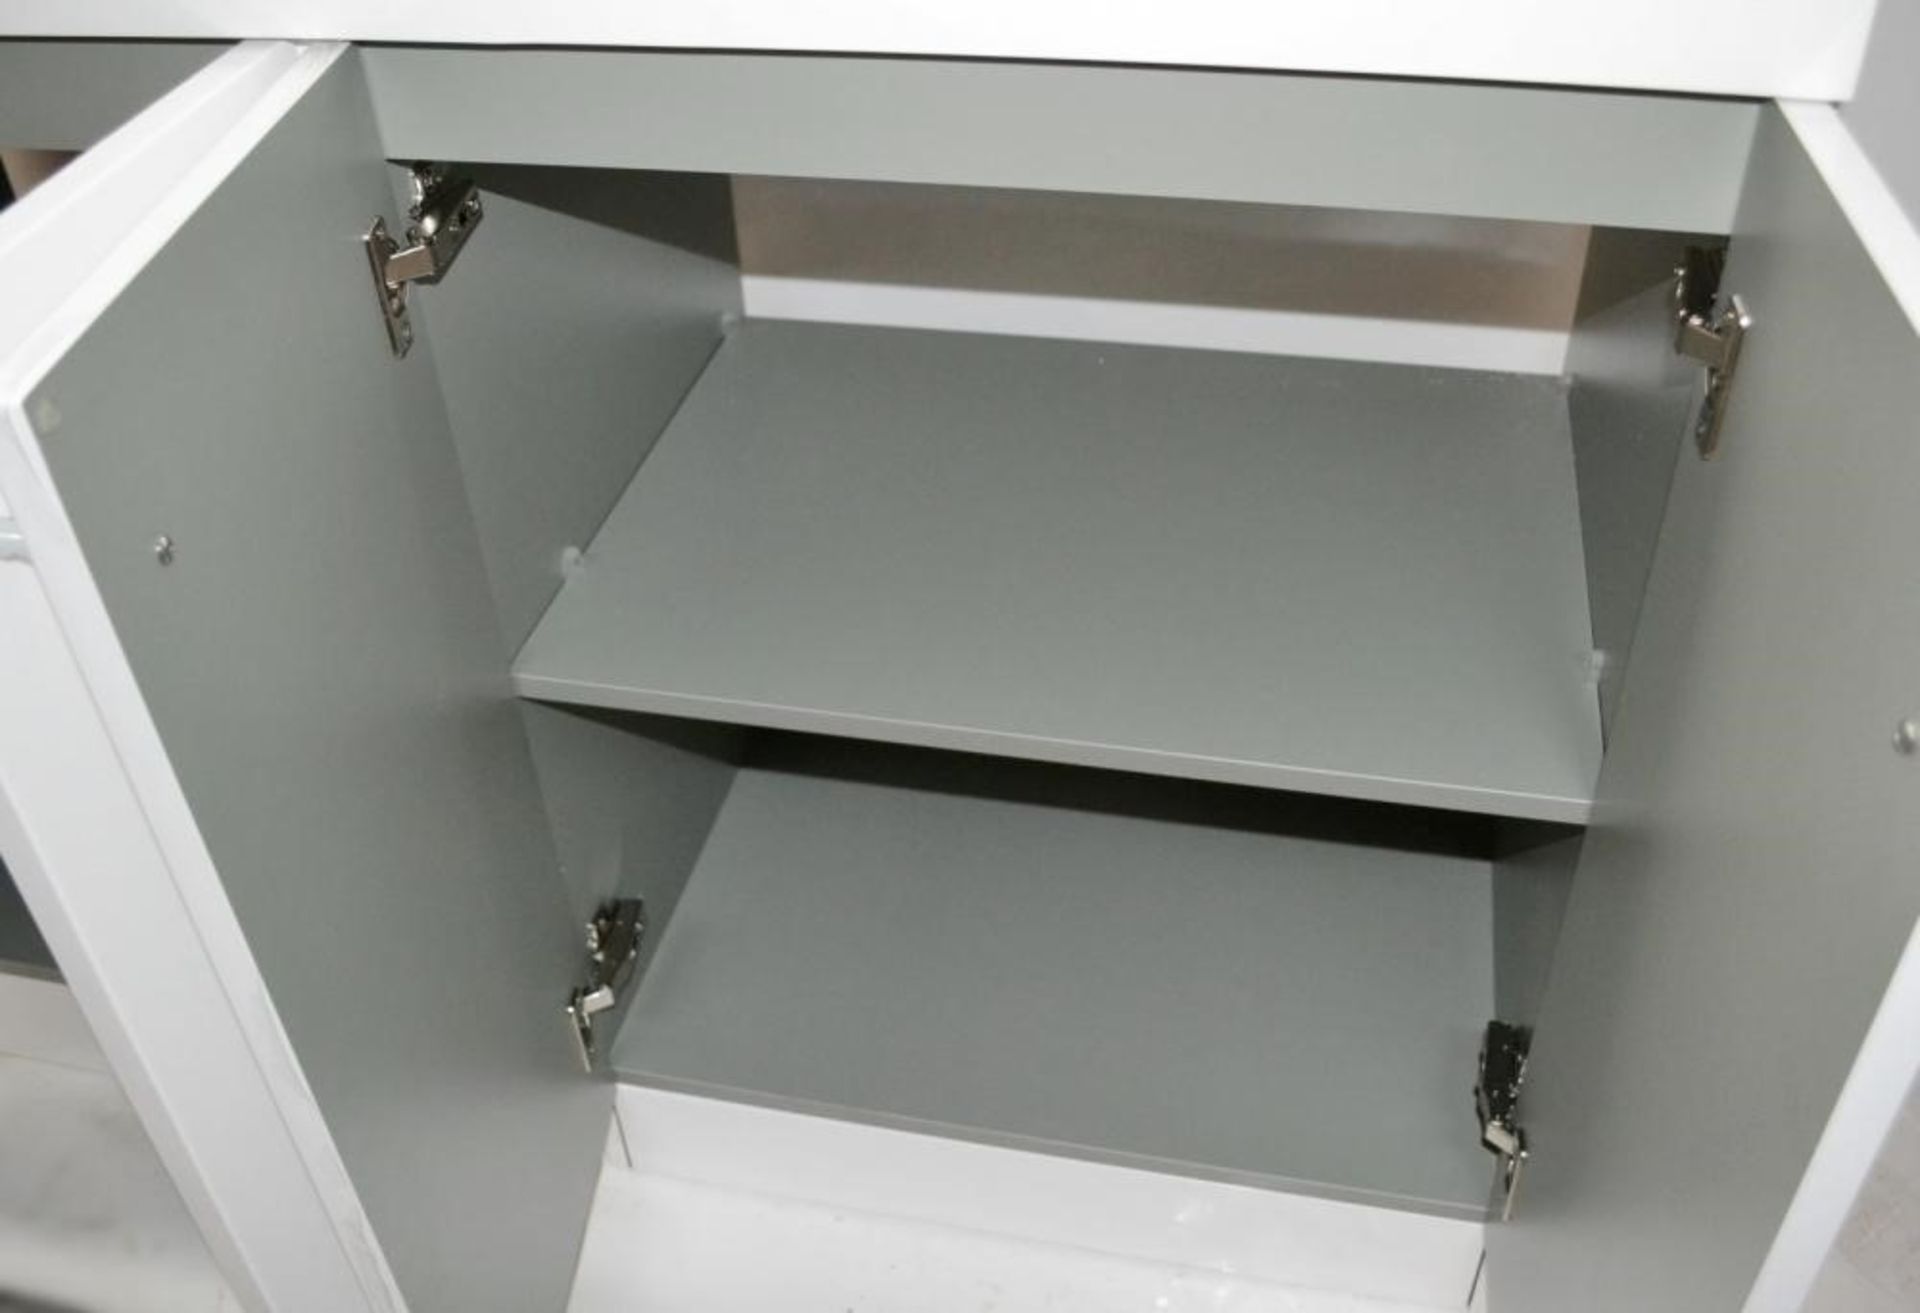 1 x Gloss White 1200mm 4-Door Double Basin Freestanding Bathroom Cabinet - New & Boxed Stock - CL307 - Image 3 of 6